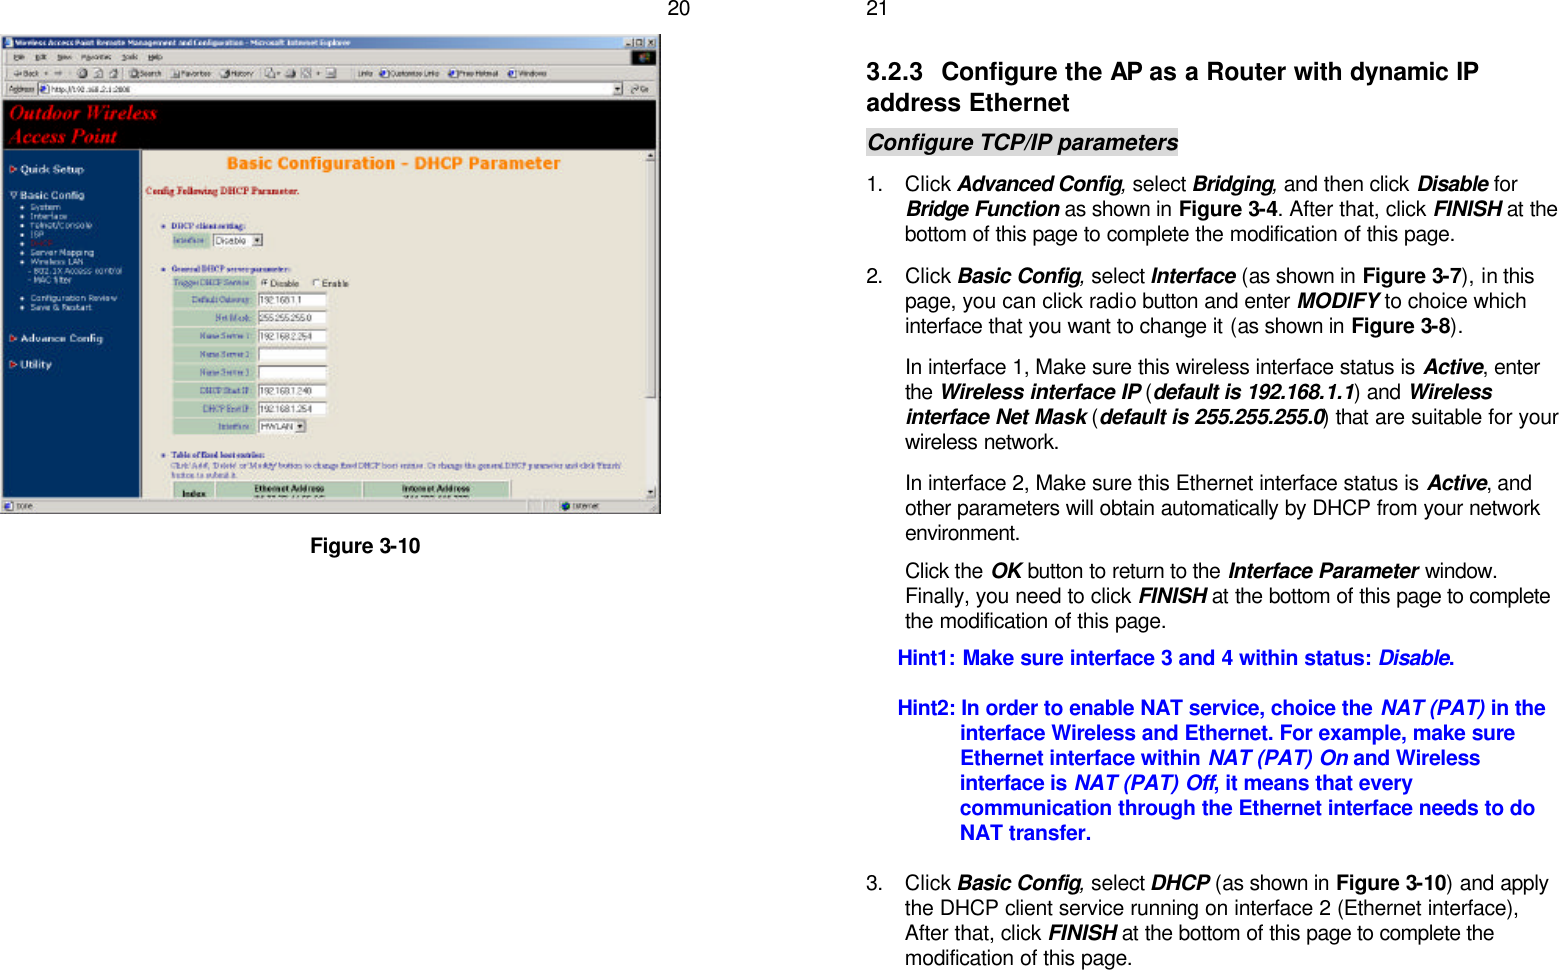   20                    Figure 3-10     213.2.3 Configure the AP as a Router with dynamic IP address Ethernet Configure TCP/IP parameters 1. Click Advanced Config, select Bridging, and then click Disable for Bridge Function as shown in Figure 3-4. After that, click FINISH at the bottom of this page to complete the modification of this page. 2. Click Basic Config, select Interface (as shown in Figure 3-7), in this page, you can click radio button and enter MODIFY to choice which interface that you want to change it (as shown in Figure 3-8). In interface 1, Make sure this wireless interface status is Active, enter the Wireless interface IP (default is 192.168.1.1) and Wireless interface Net Mask (default is 255.255.255.0) that are suitable for your wireless network. In interface 2, Make sure this Ethernet interface status is Active, and other parameters will obtain automatically by DHCP from your network environment. Click the OK button to return to the Interface Parameter window. Finally, you need to click FINISH at the bottom of this page to complete the modification of this page. Hint1: Make sure interface 3 and 4 within status: Disable. Hint2: In order to enable NAT service, choice the NAT (PAT) in the interface Wireless and Ethernet. For example, make sure Ethernet interface within NAT (PAT) On and Wireless interface is NAT (PAT) Off, it means that every communication through the Ethernet interface needs to do NAT transfer. 3. Click Basic Config, select DHCP (as shown in Figure 3-10) and apply the DHCP client service running on interface 2 (Ethernet interface), After that, click FINISH at the bottom of this page to complete the modification of this page.  